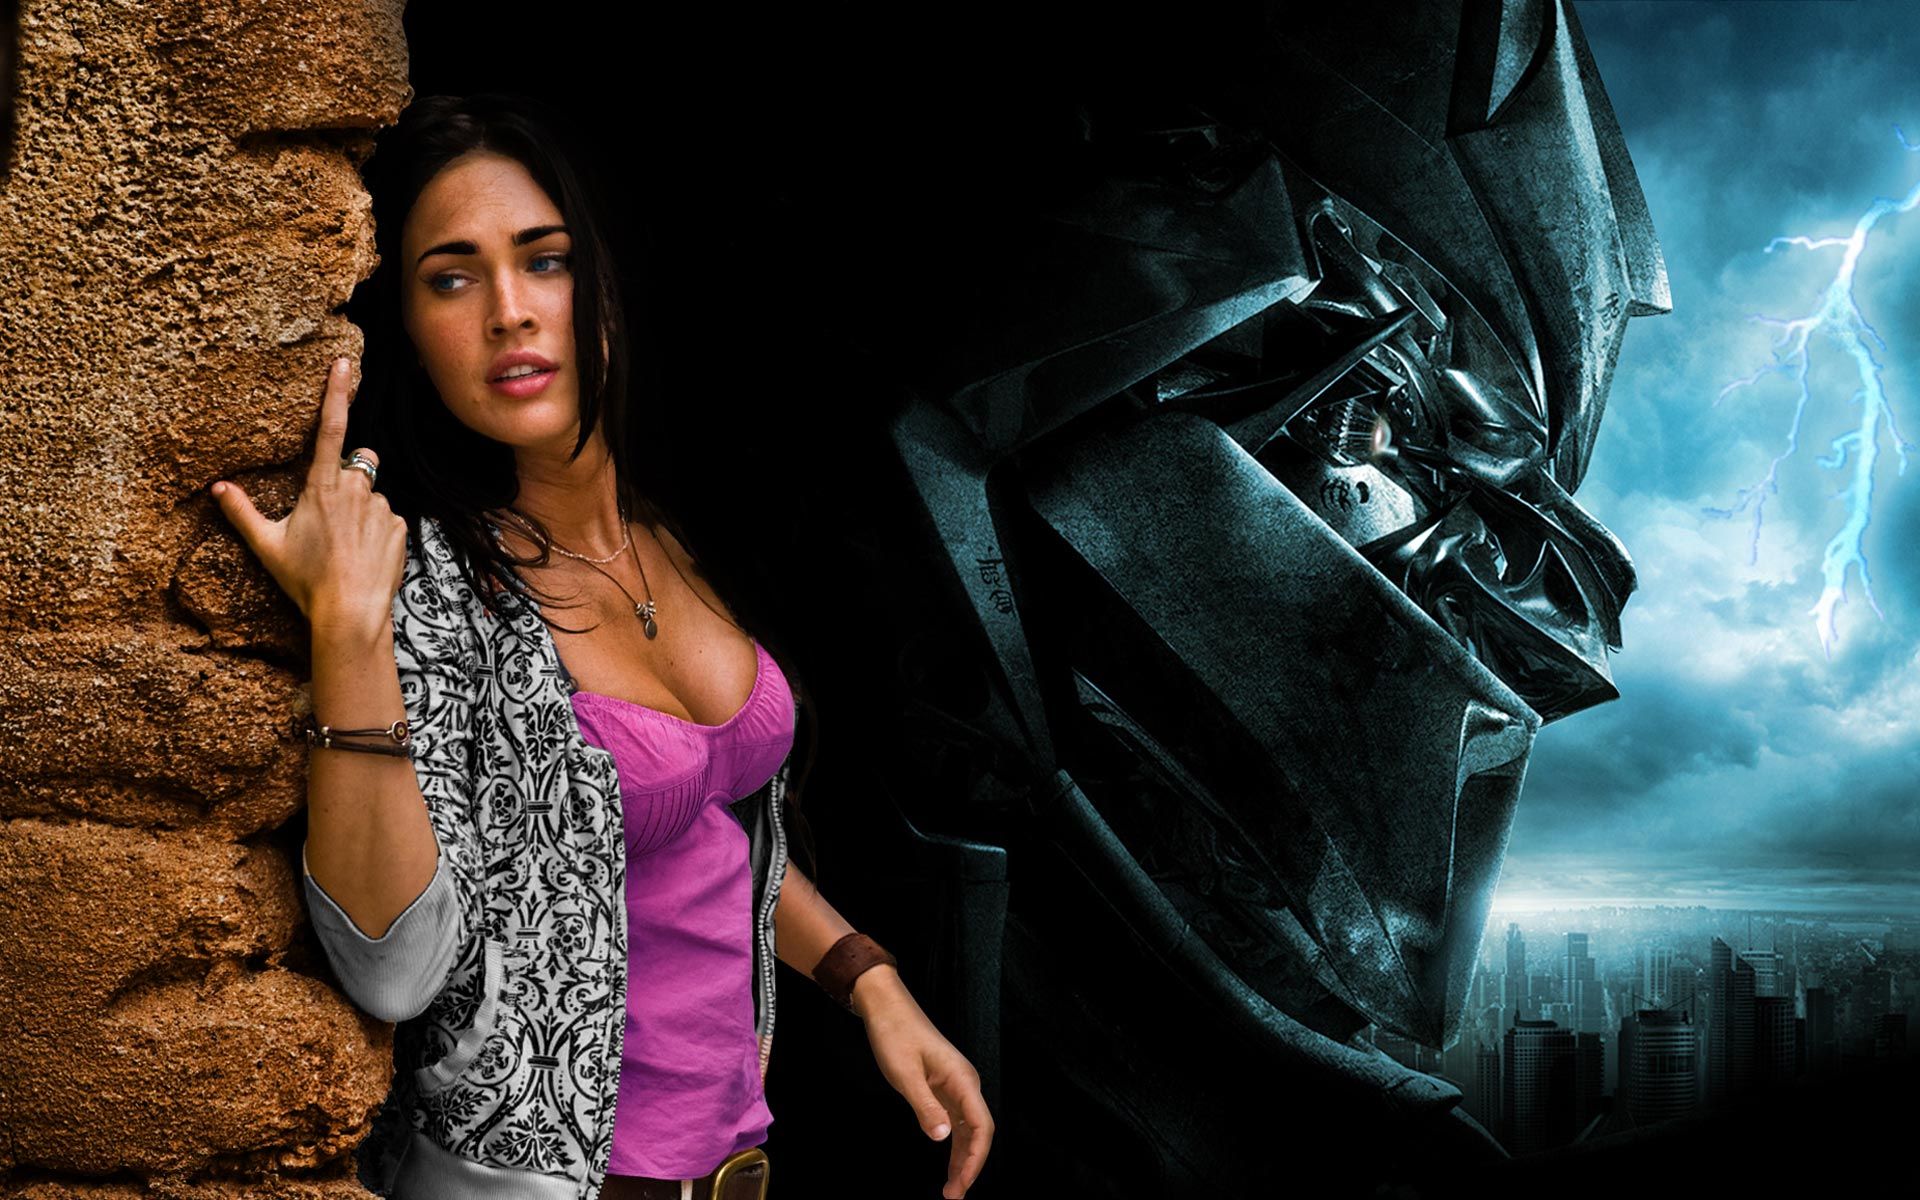 Well i do like megan fox's change of colors according to the wallpaper. Megan fox transformers, Megan fox, Megan fox transformers 1